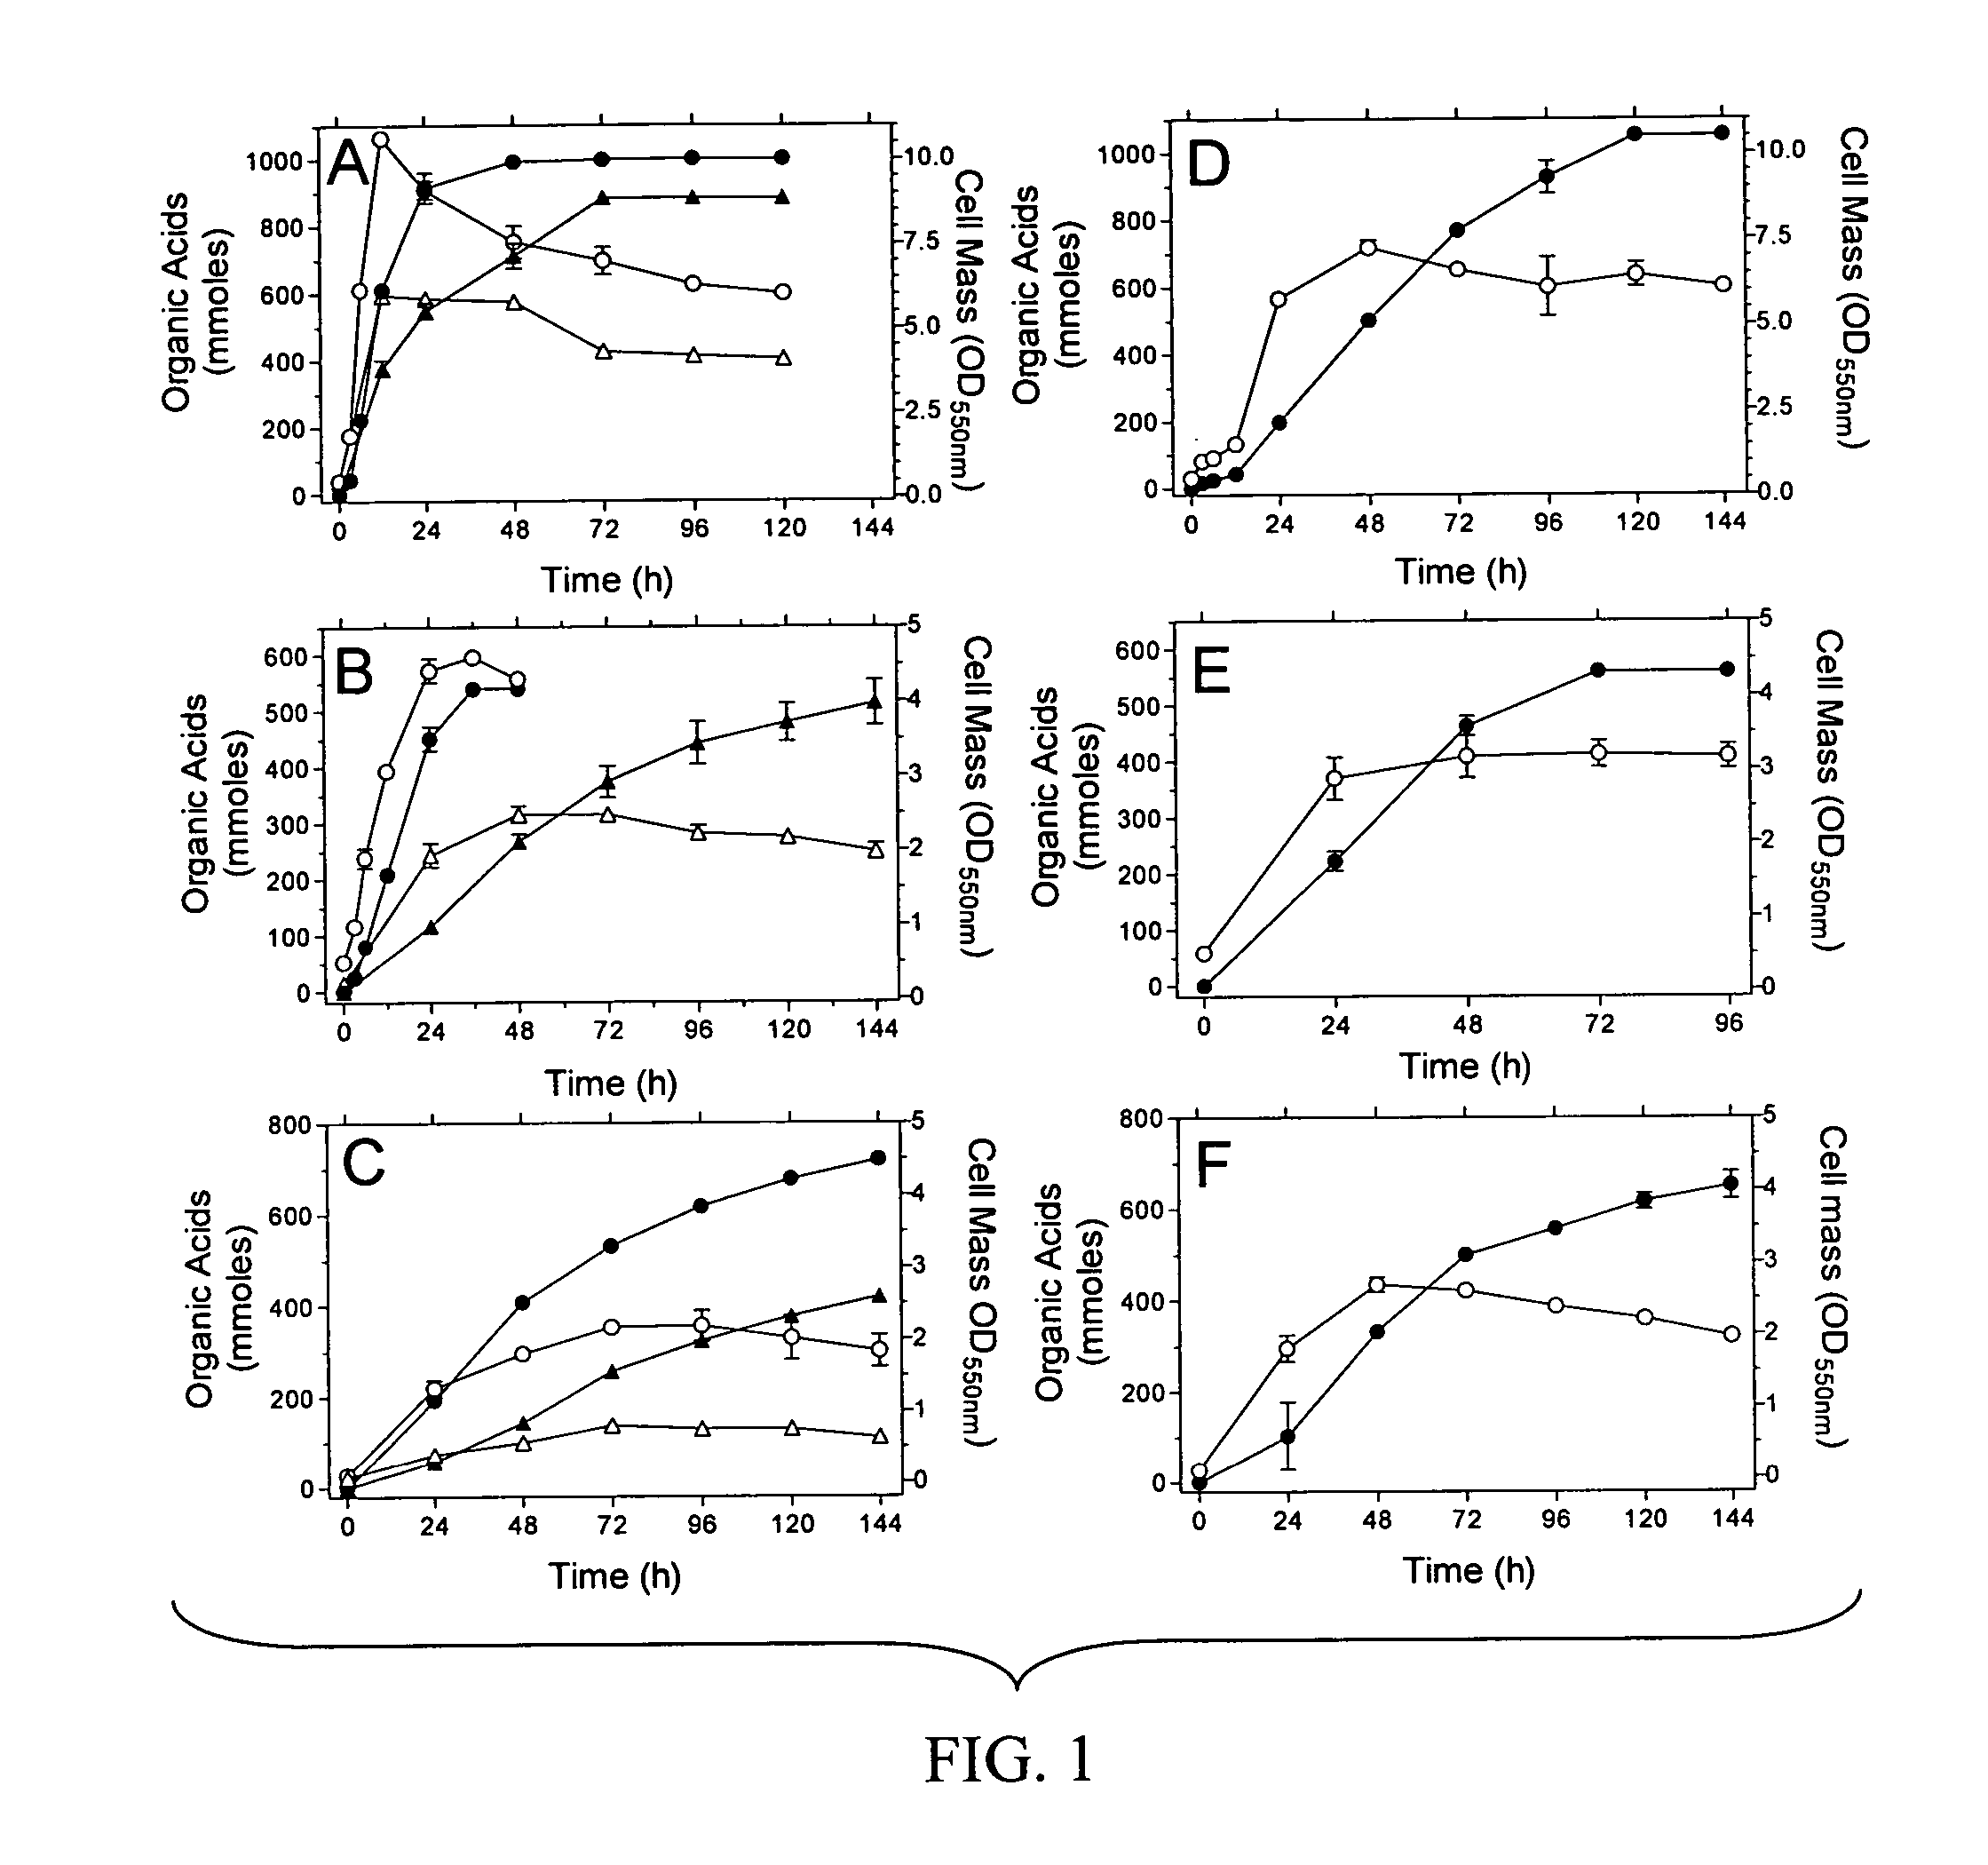 Materials and methods for efficient lactic acid production